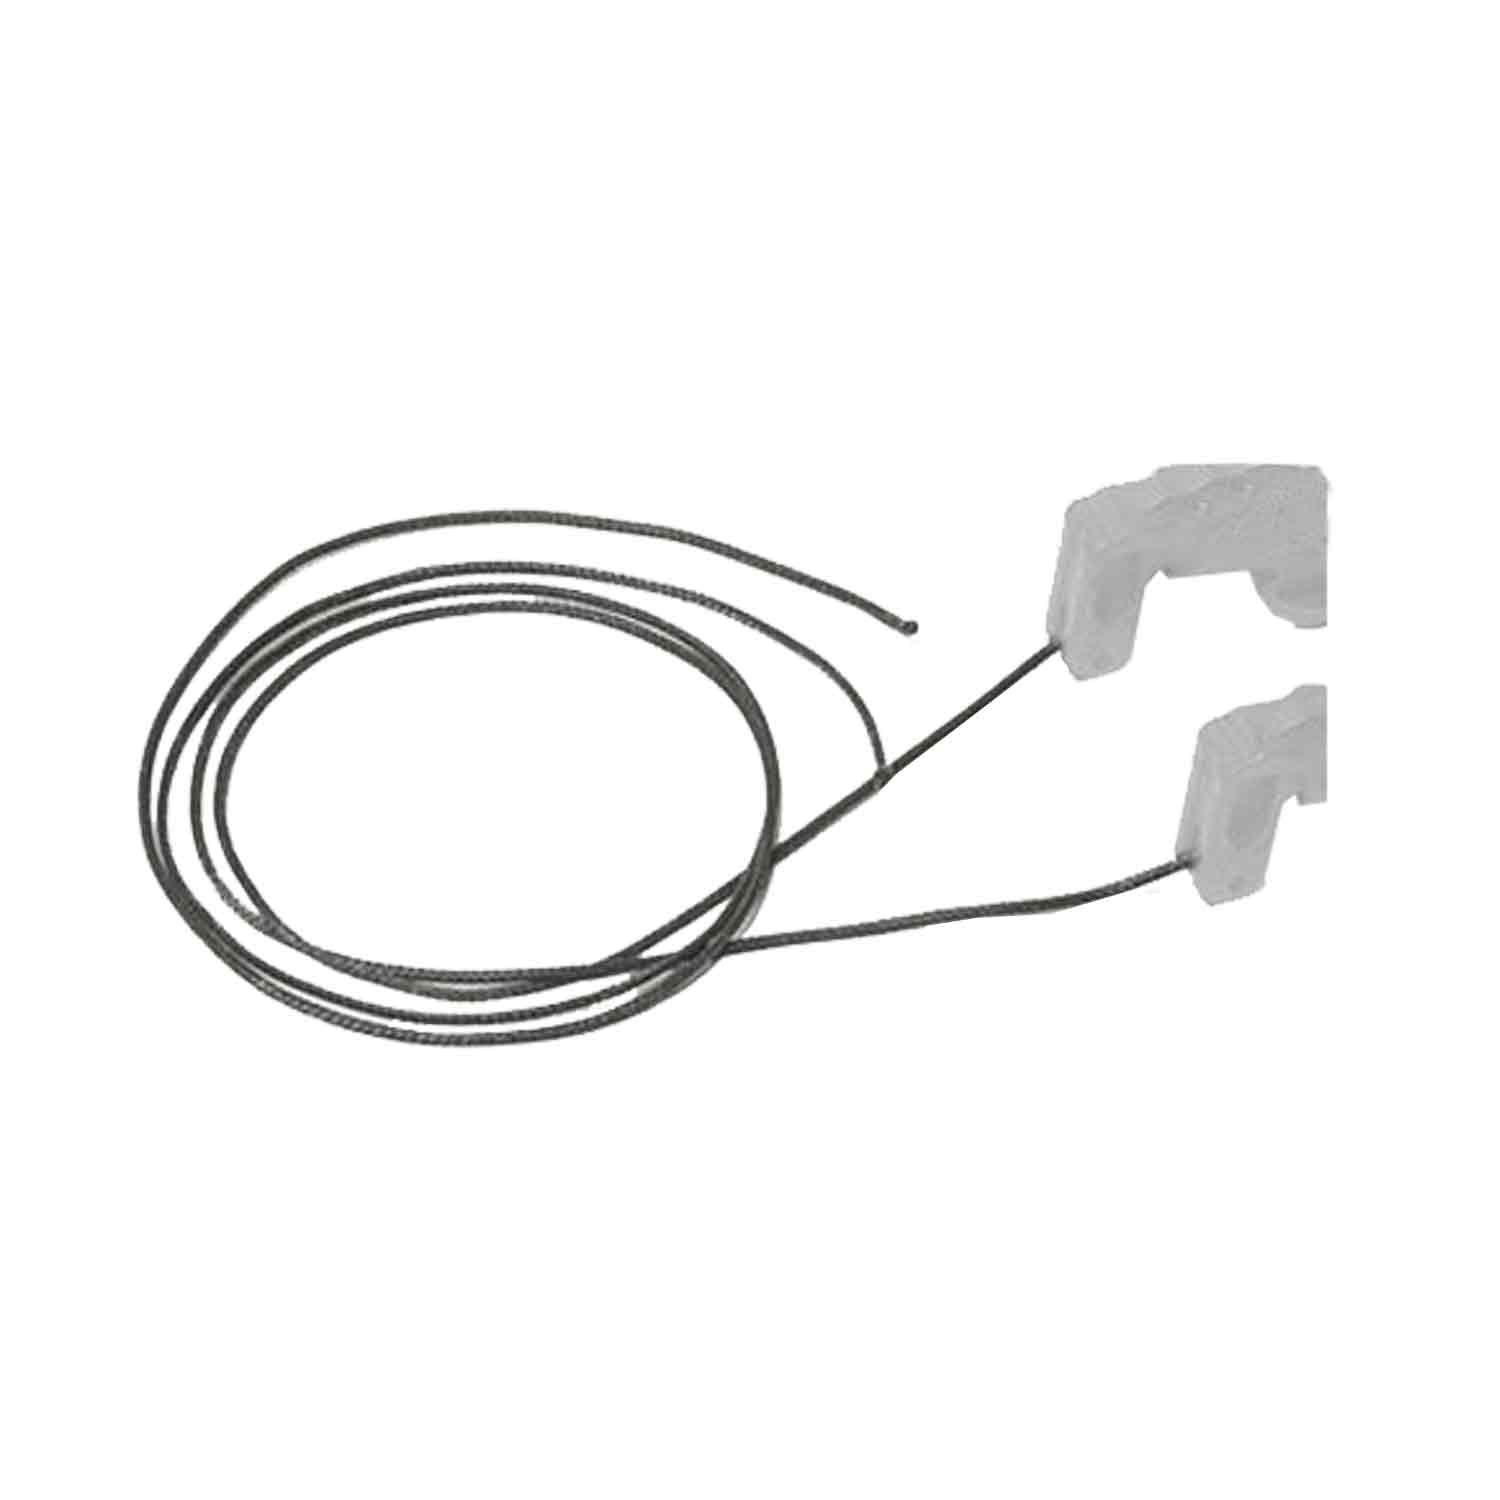 TenPoint AcuDraw Replacement Draw Cord